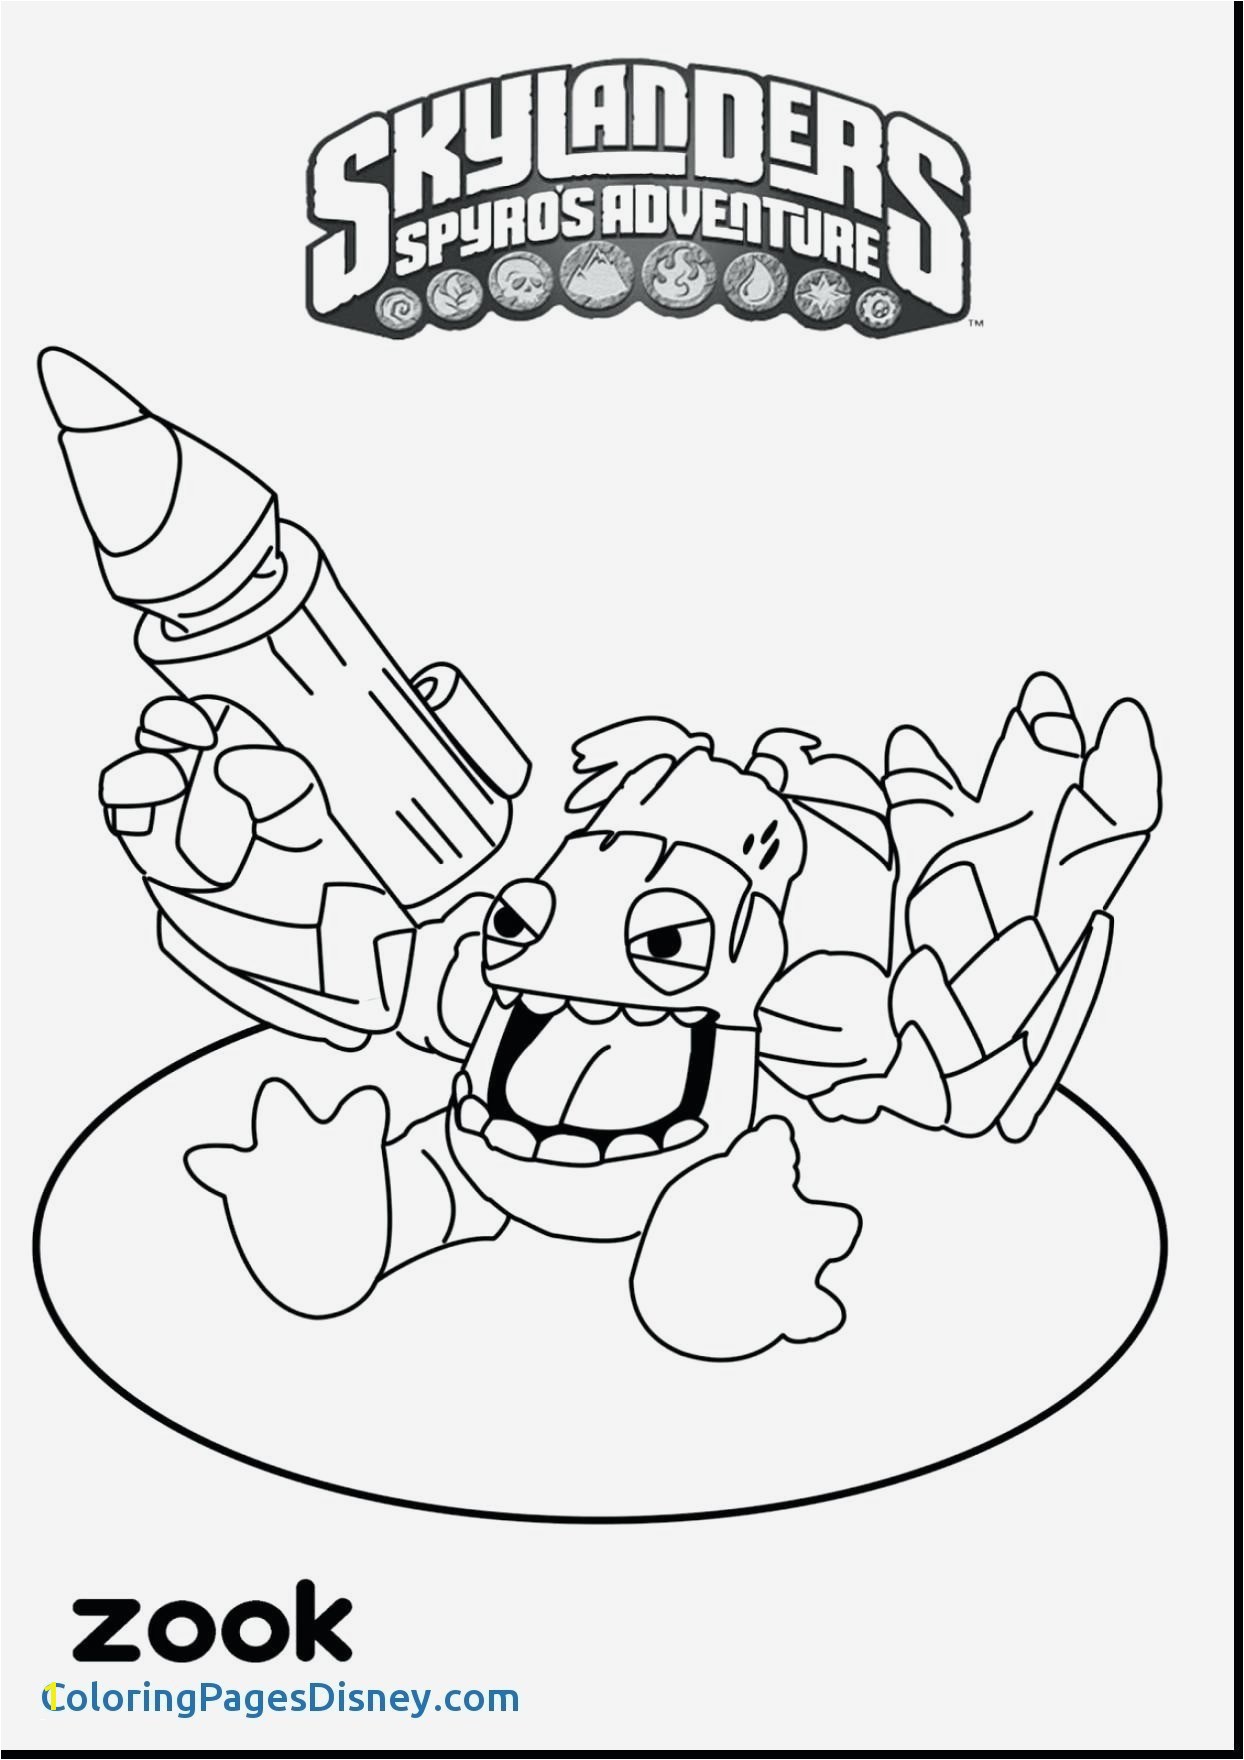 Free Coloring Pages for Christmas Elmo Christmas Coloring Pages Free Coloring Pages Fall Printable New